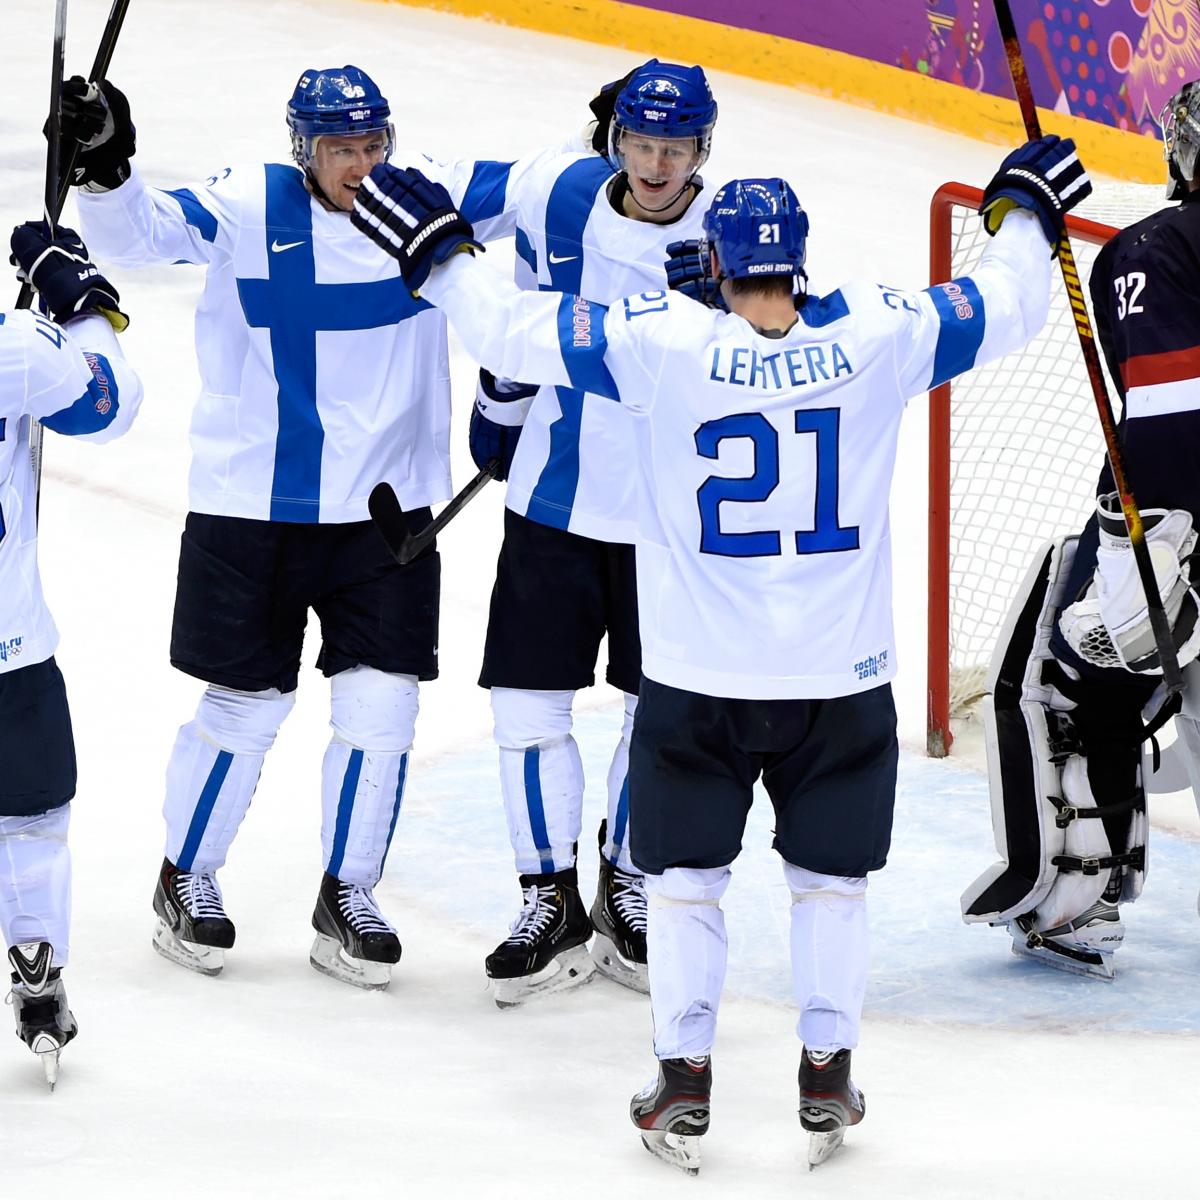 USA vs Finland Olympic Hockey 2014 Live Score, Highlights for Bronze